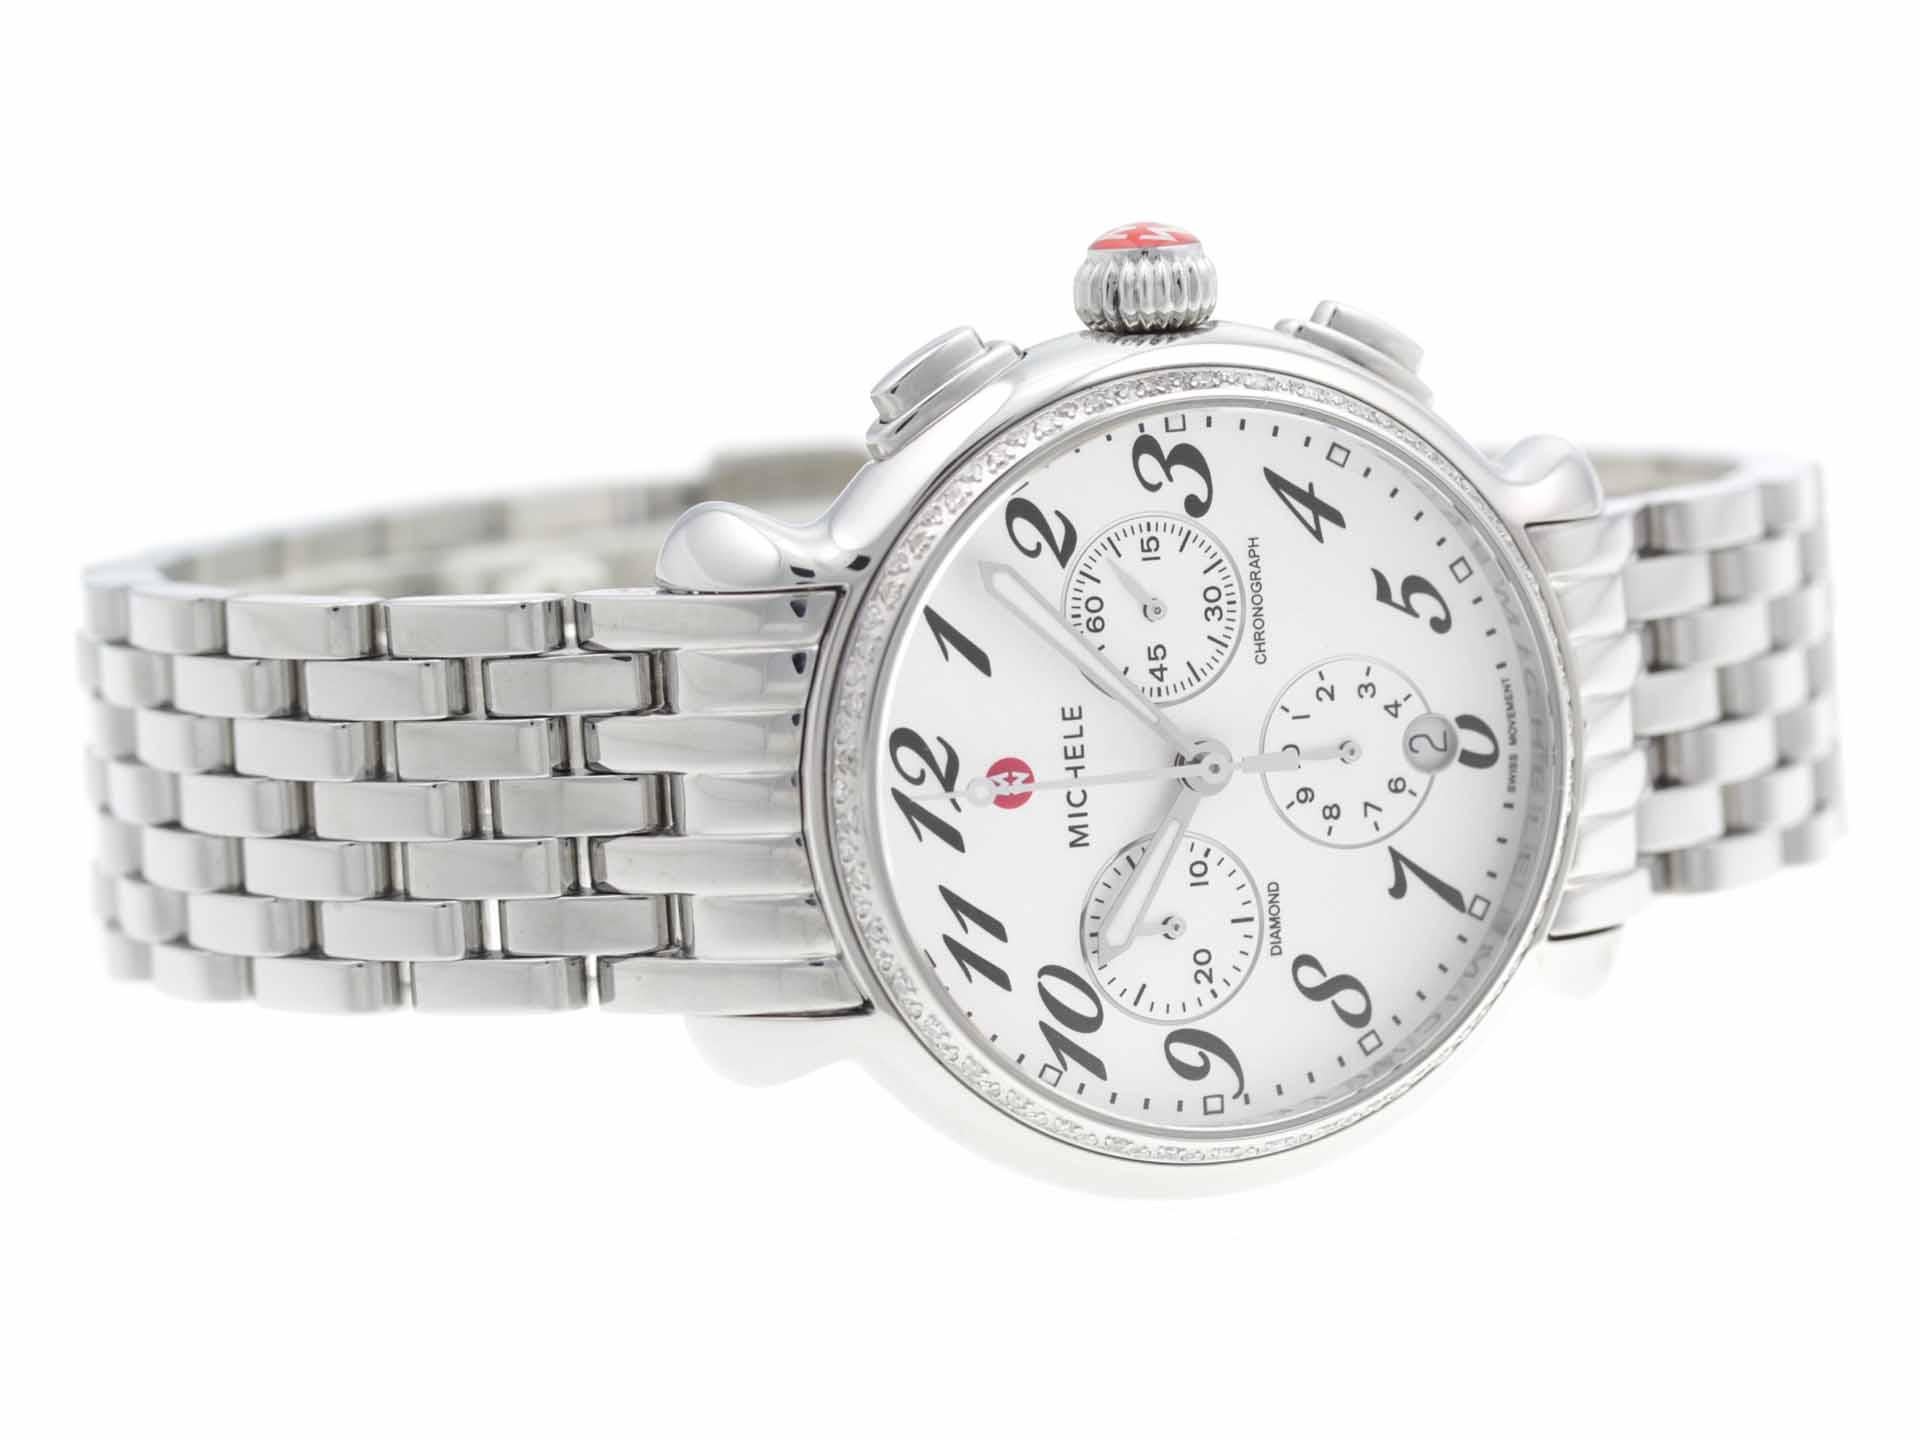 Stainless steel Michele Flutette Chrono watch, with diamond bezel, chronograph, and bracelet.


Brand	Michele
Series	Fluette Chrono
Model	MWW24A000001
Gender	Ladies
Condition	Great Display Model, Light Scratches on Case & Bracelet
Material	Stainless